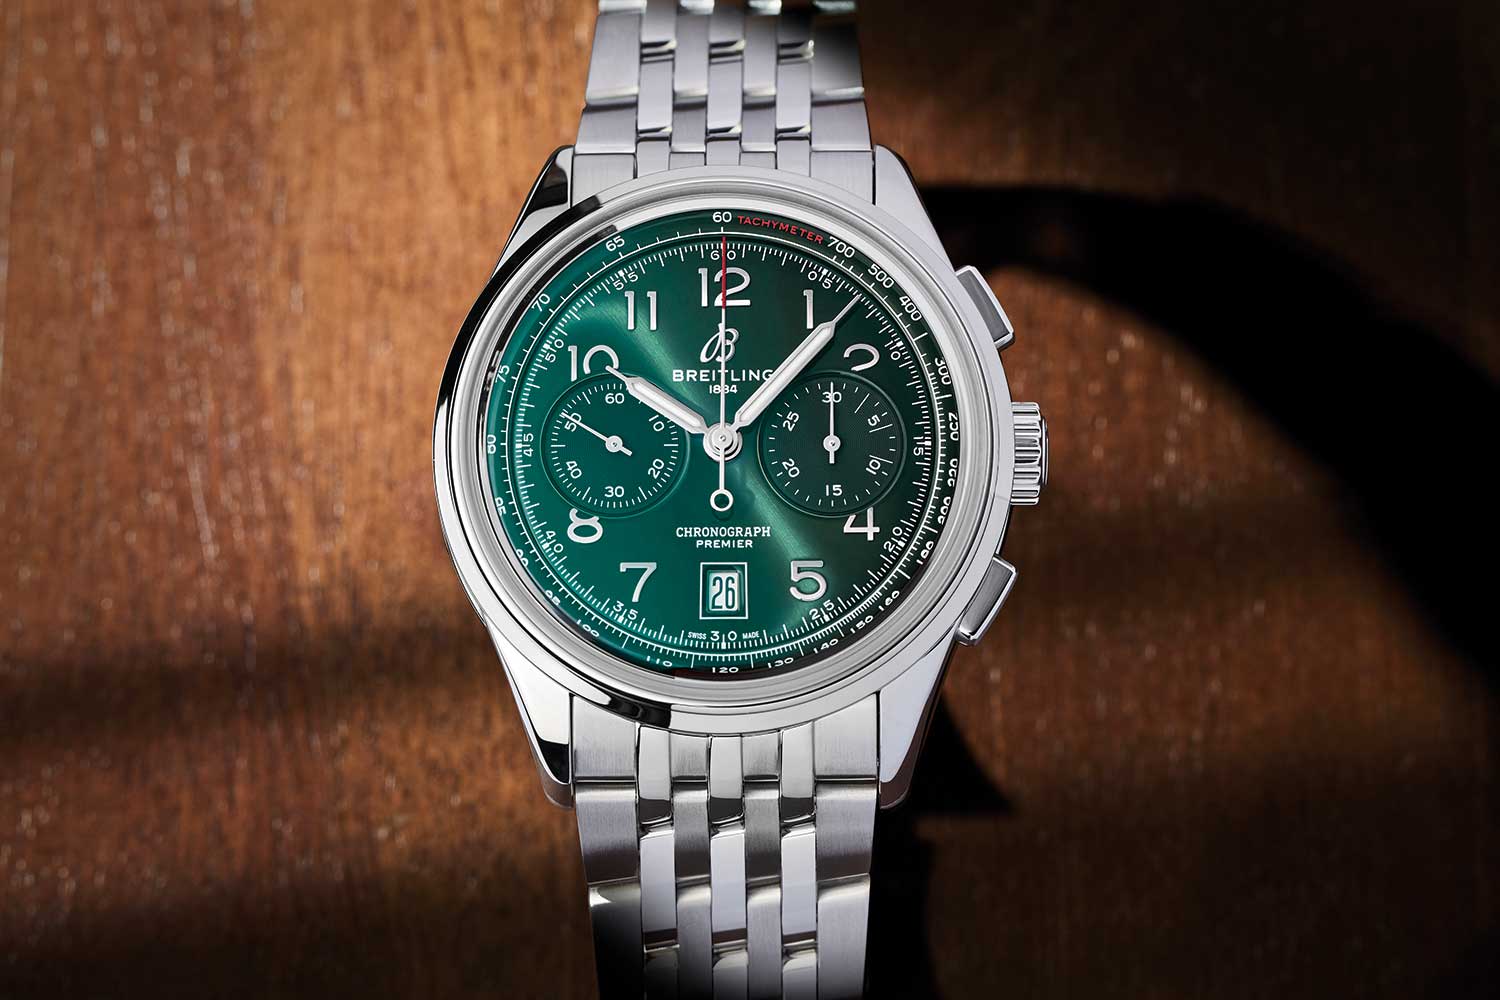 With green dial and steel bracelet, the classical design takes on a contemporary flair